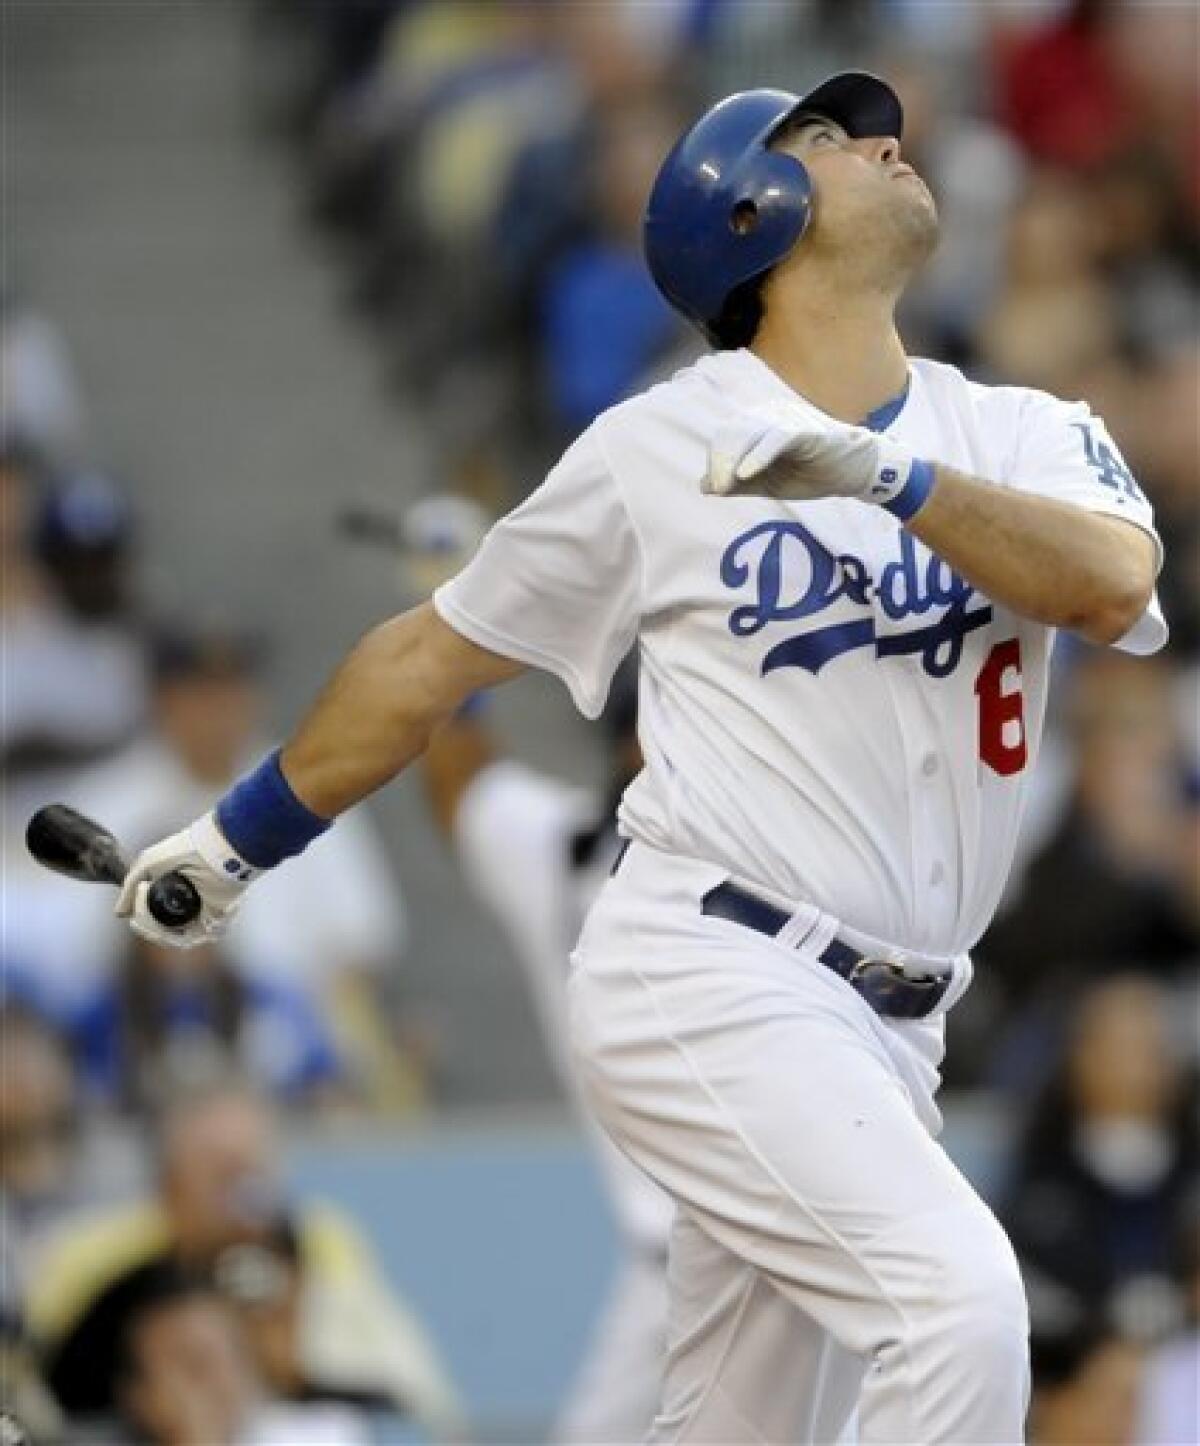 Ethier's two-run double gives Dodgers 4-3 win - The San Diego Union-Tribune